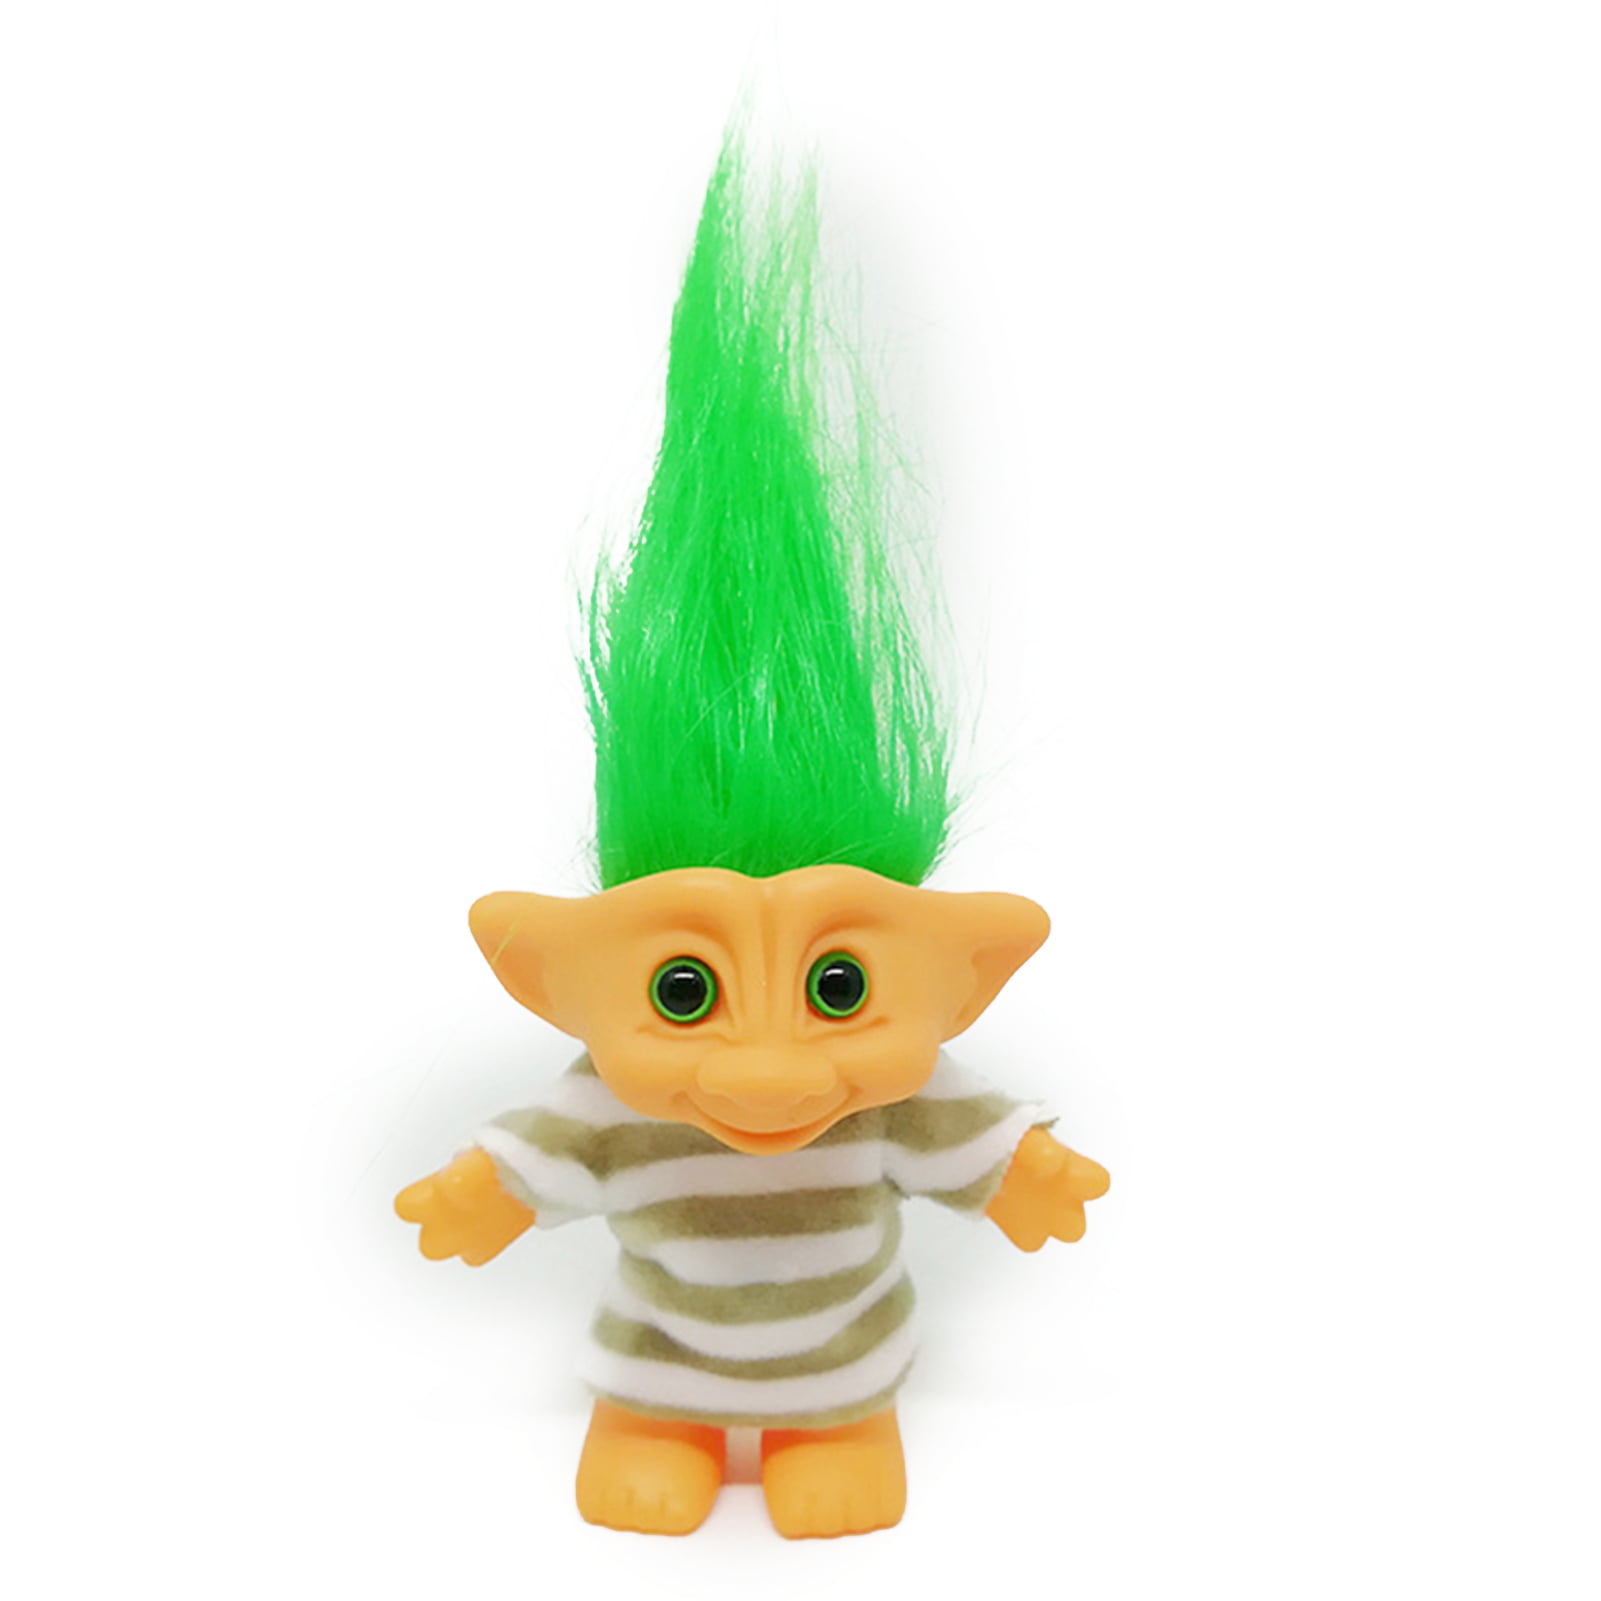 Arts and Crafts PVC Vintage Trolls Dolls Lucky Doll Action Figures Chromatic Adorable for Collections Green Diamond Include The Length of Hair School Project Party Favors 7.5 Tall